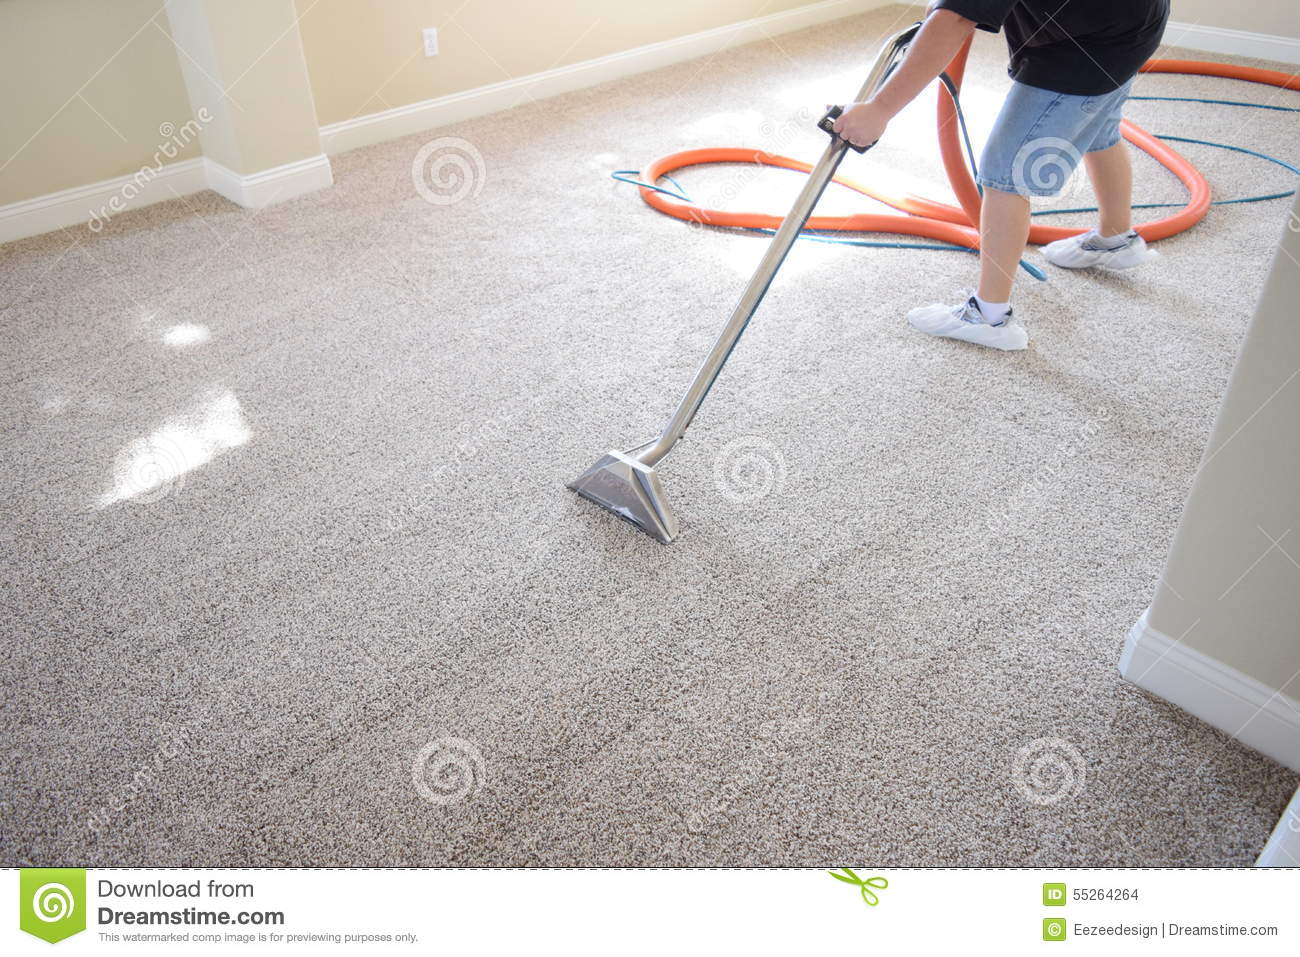 Take Advantage of the Magic of Dry Wet Carpet Agents for Perfect Floors